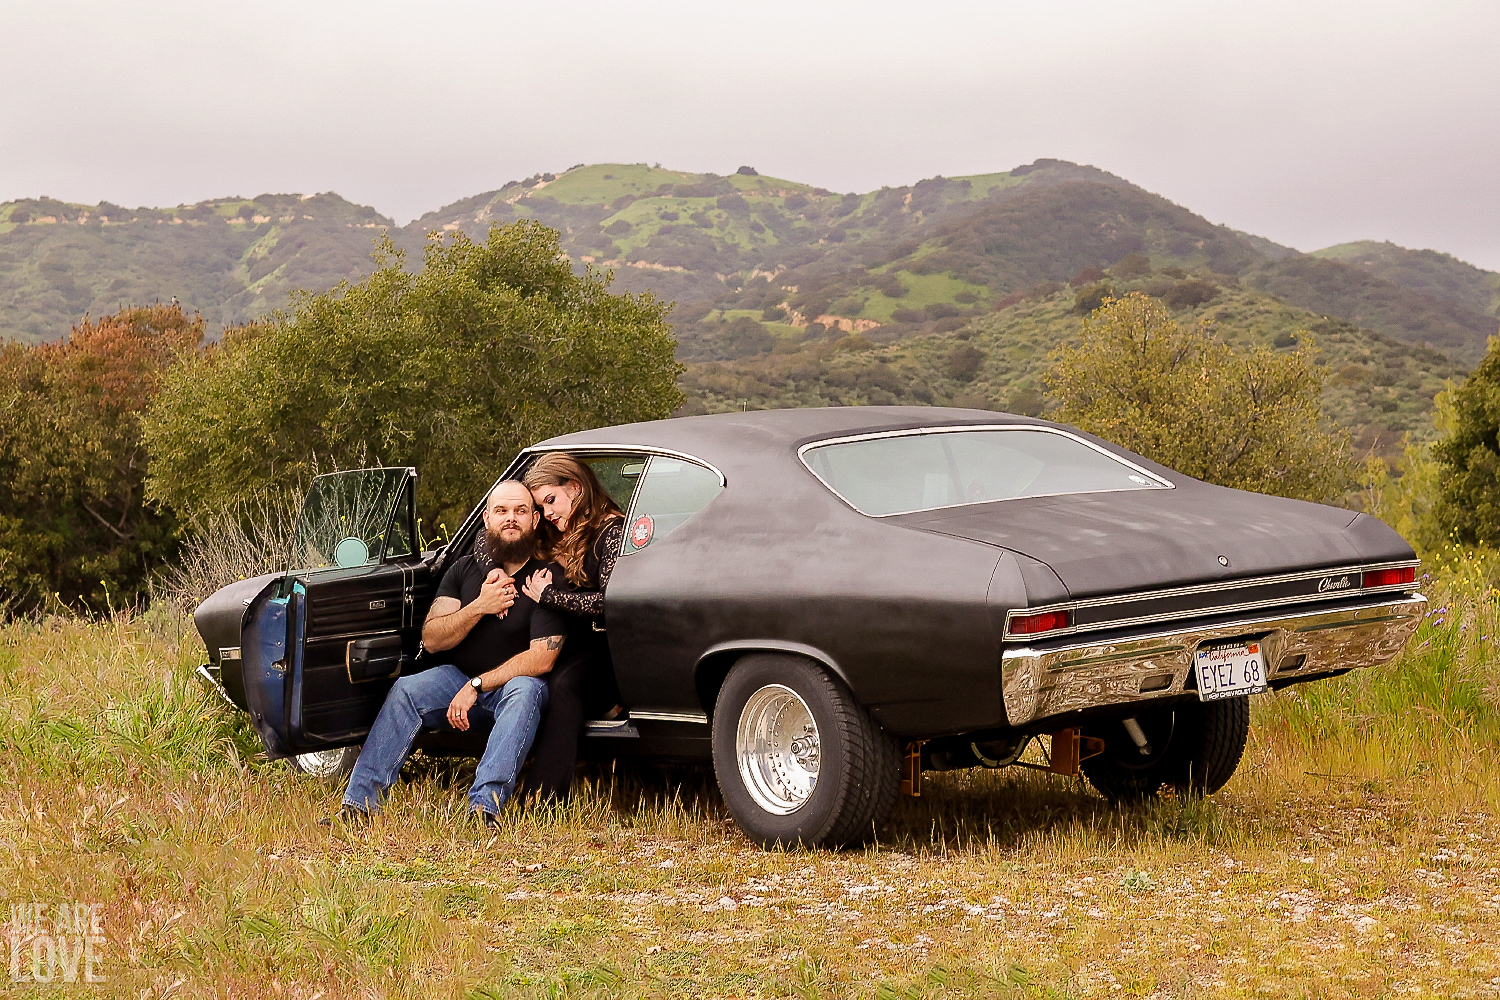 witchy_engagement_photoshoot_los_angeles_3